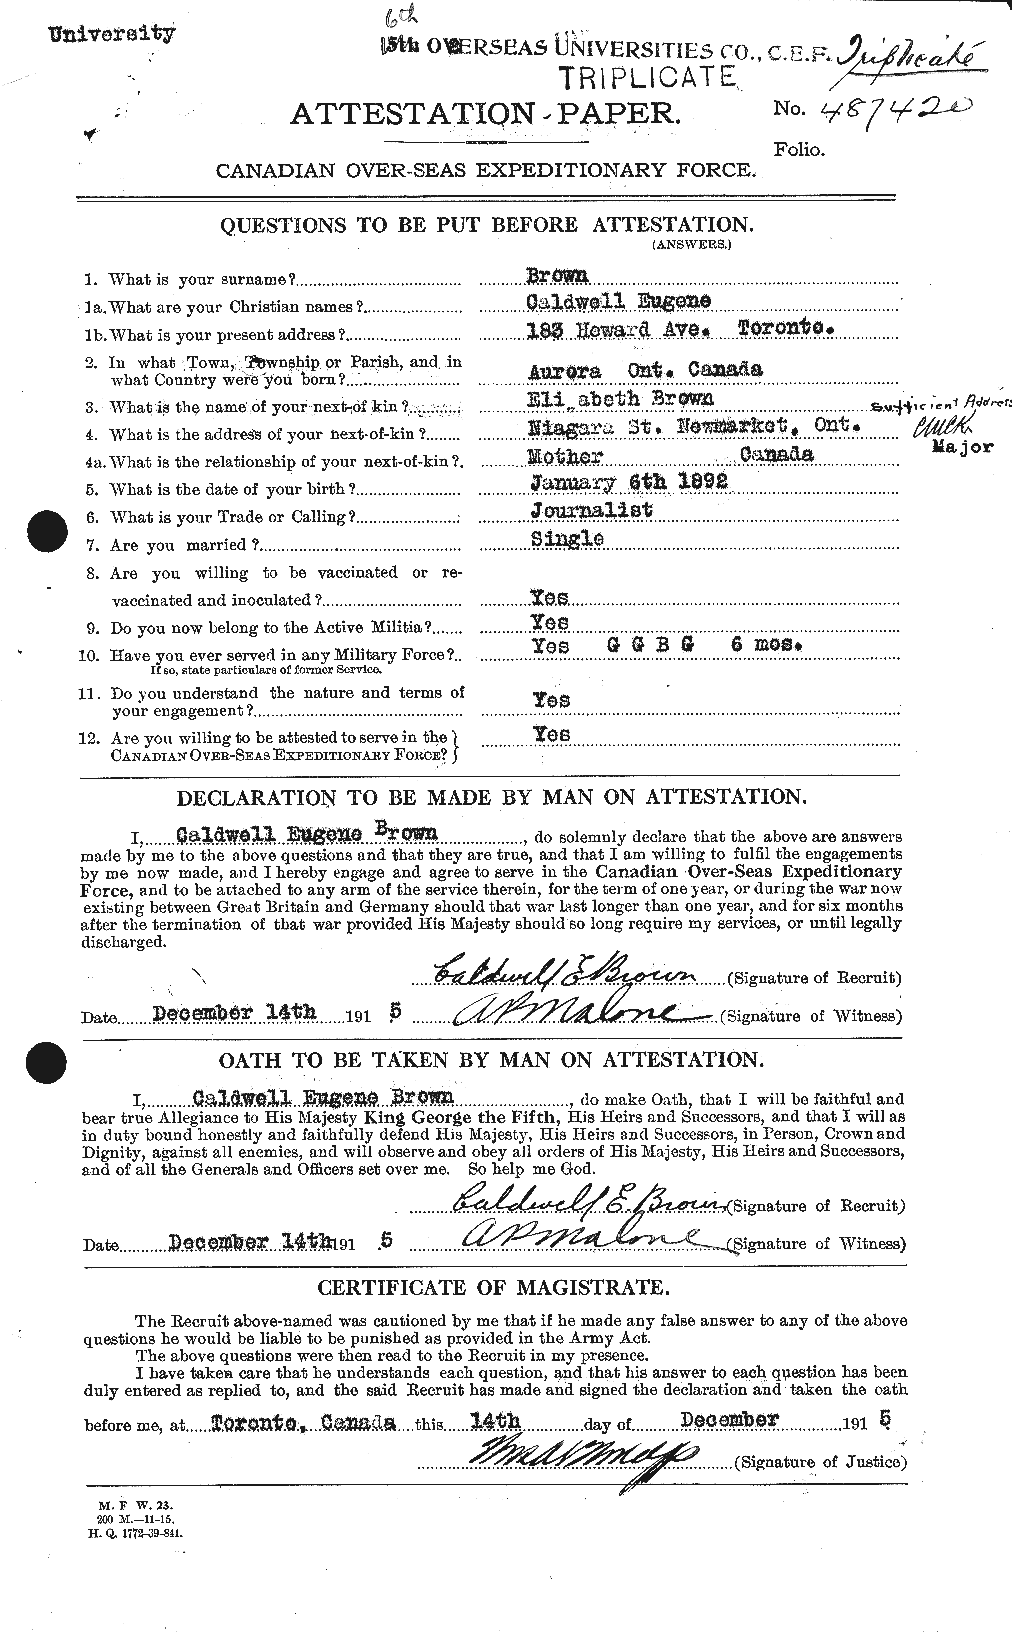 Personnel Records of the First World War - CEF 264307a